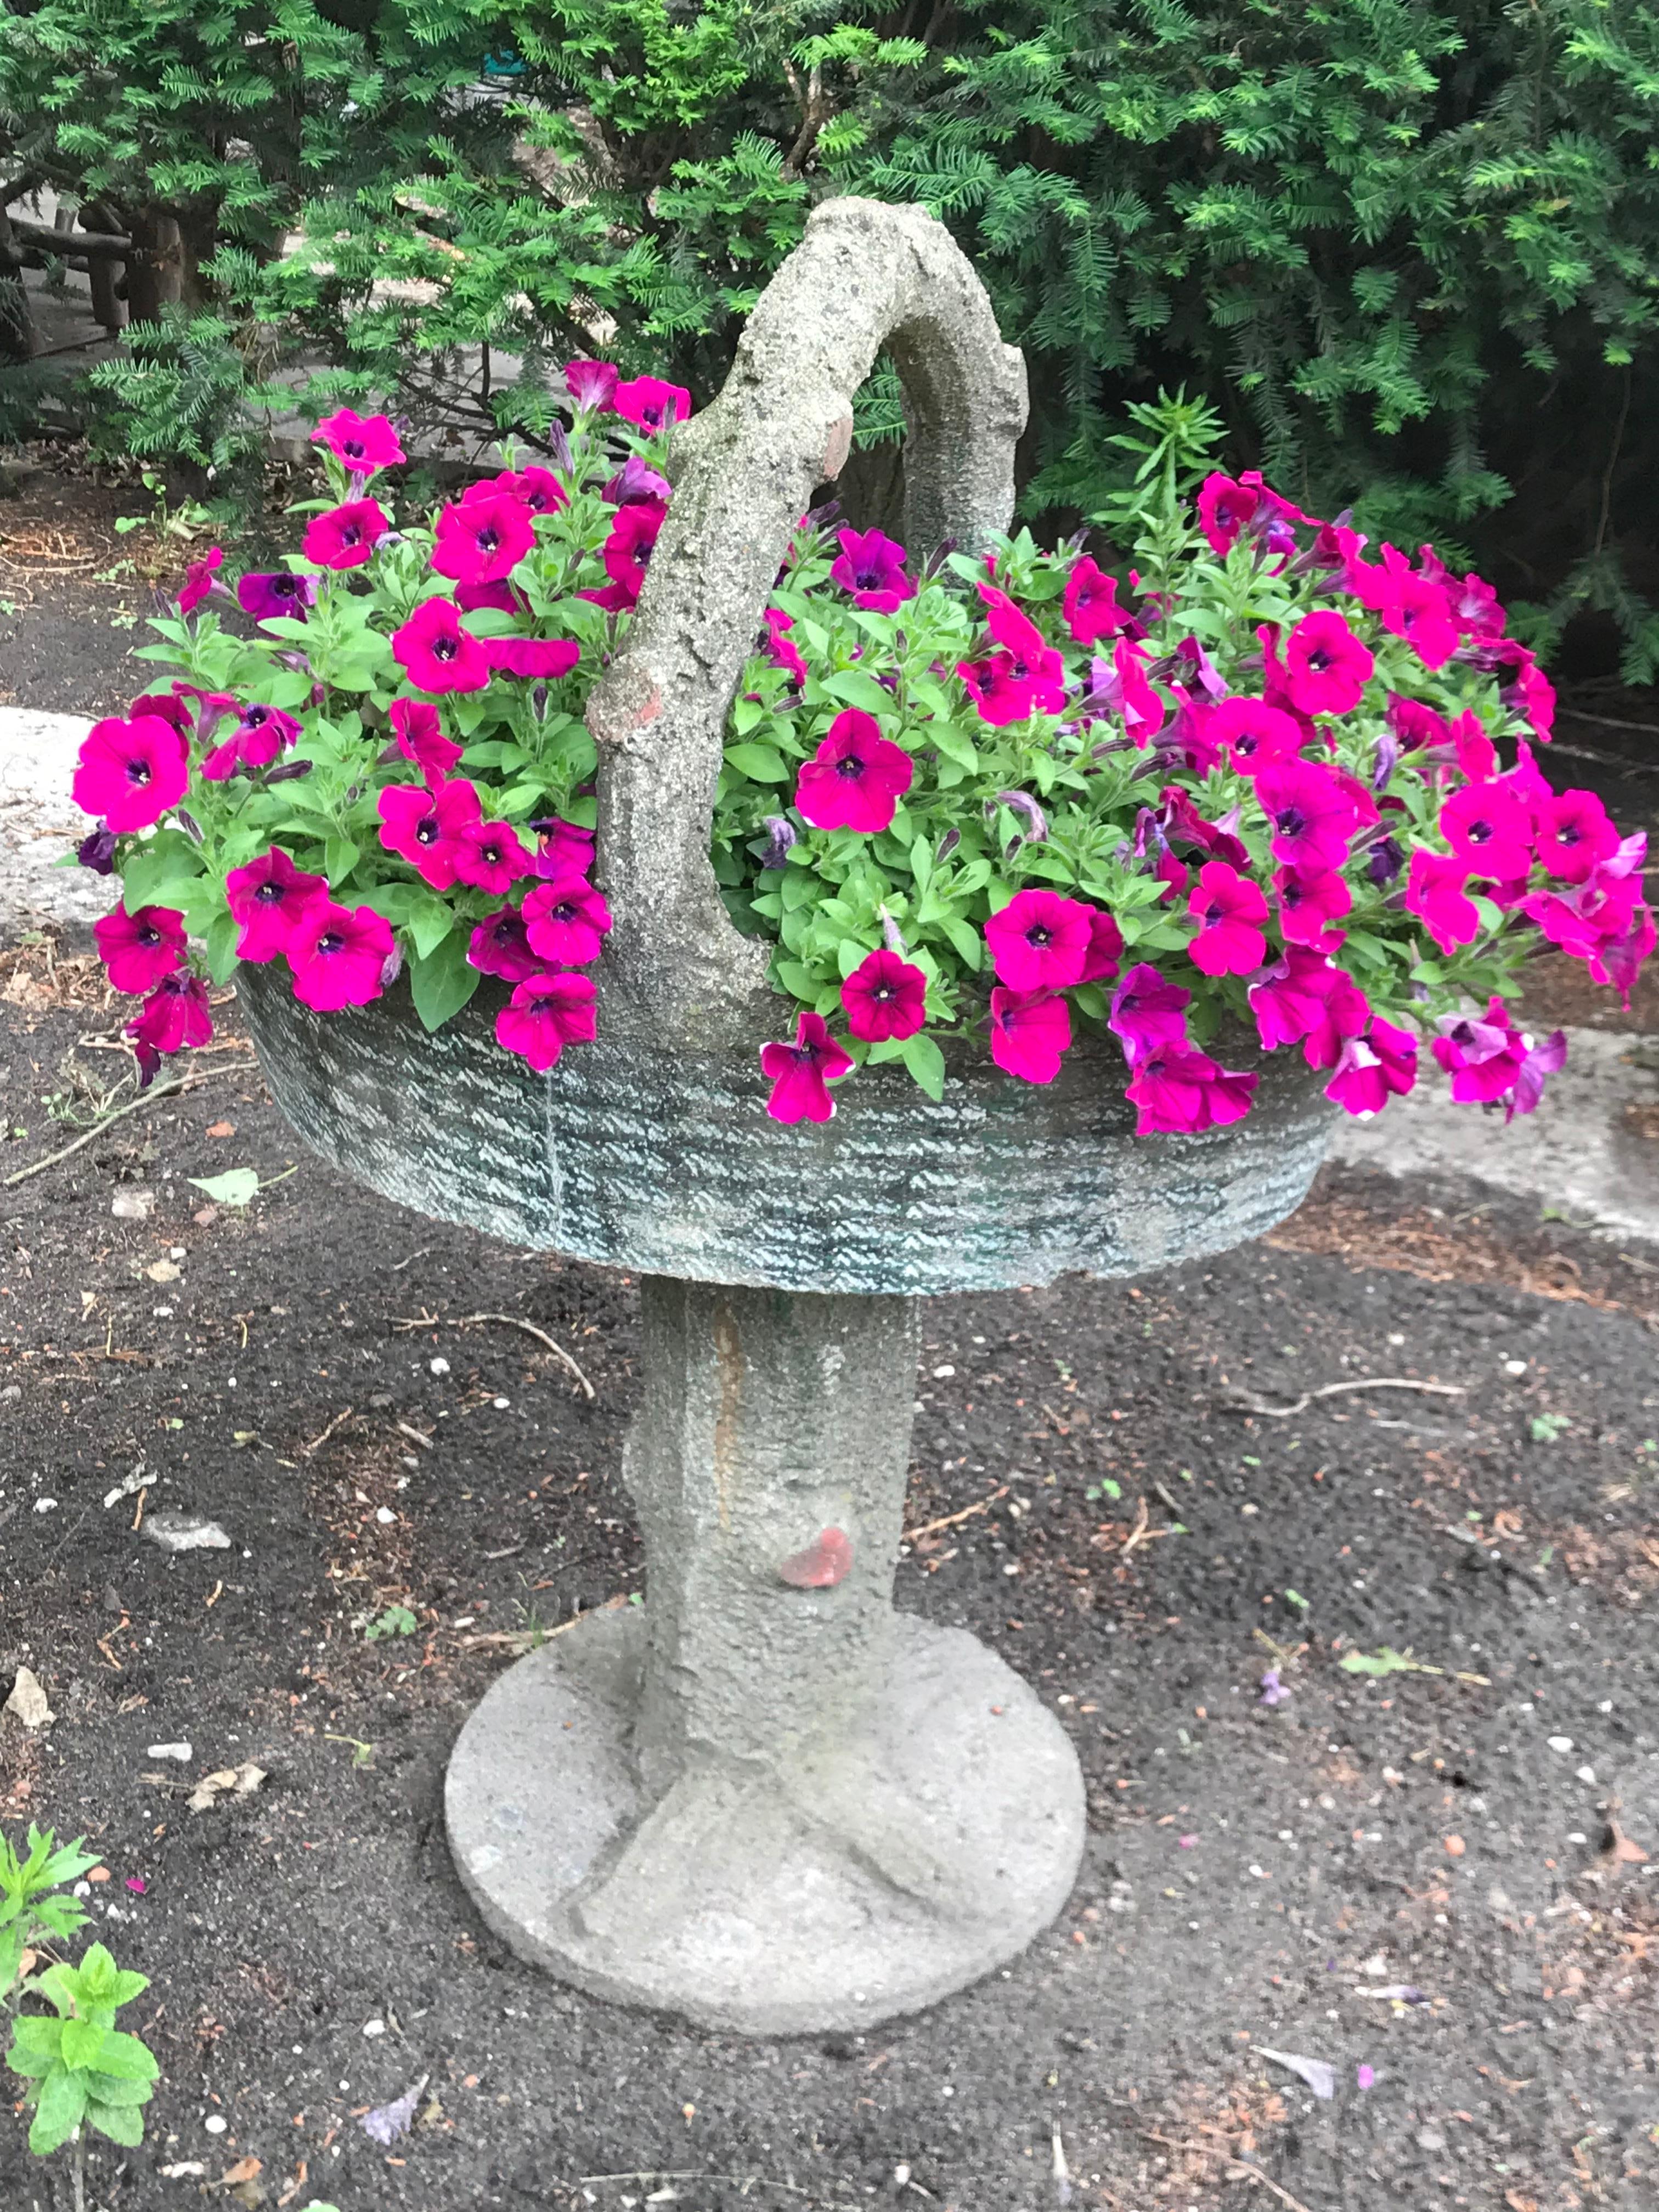 Large faux bois basket on a stand that could be used as a planter, bird bath or fountain.
In good condition; the basket is removable and sits securely on the faux tree base (secured in the center with an iron pin). Such a wonderful piece of